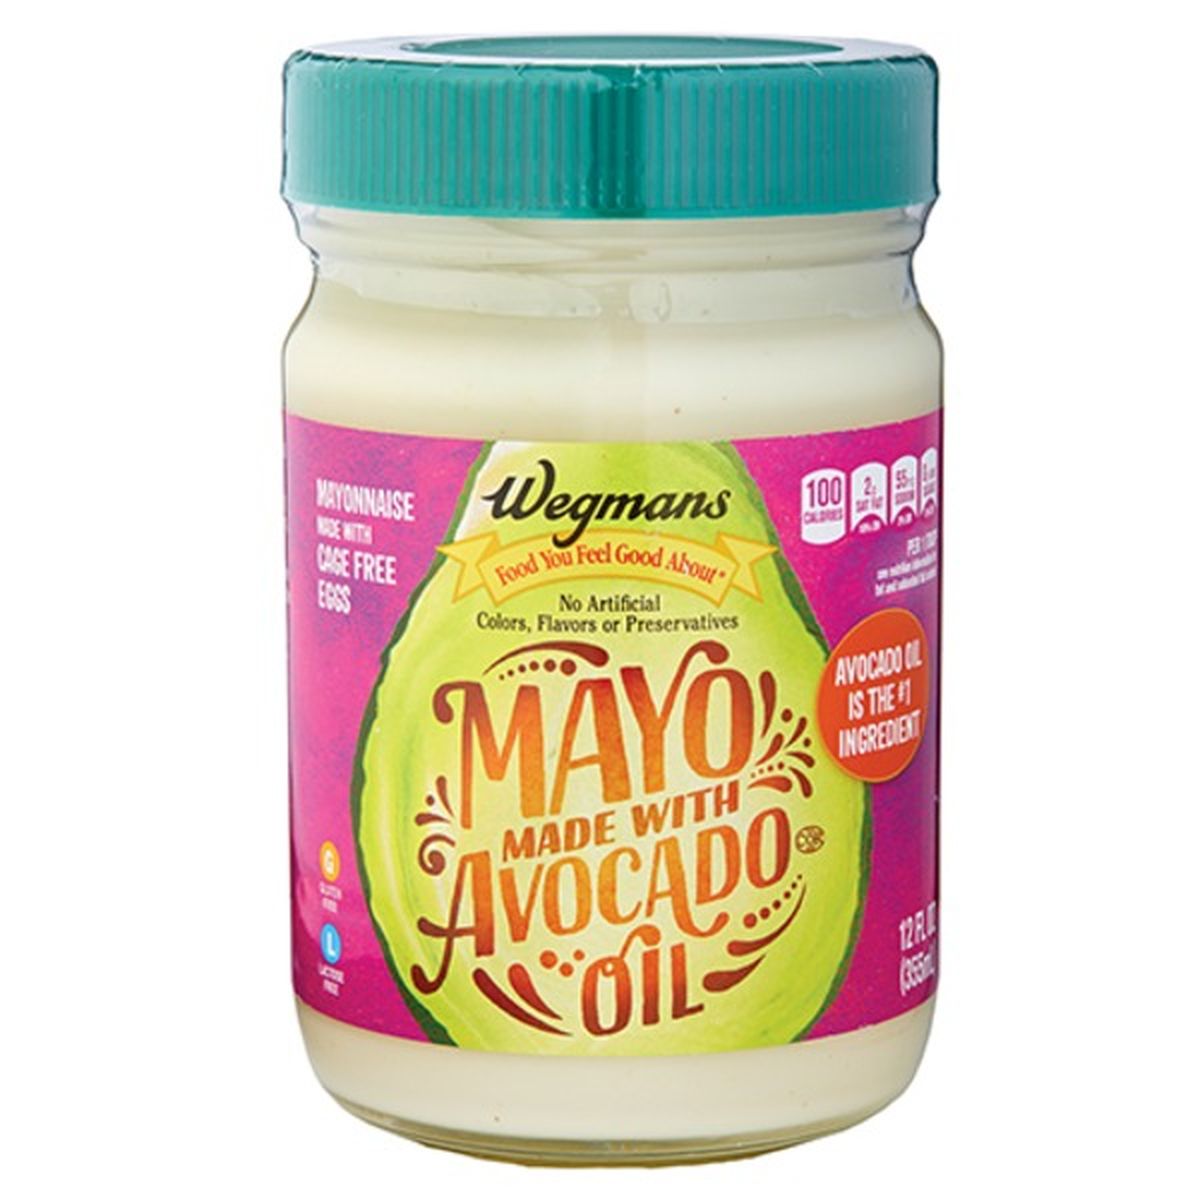 Calories in Wegmans Mayo Made with Avocado Oil